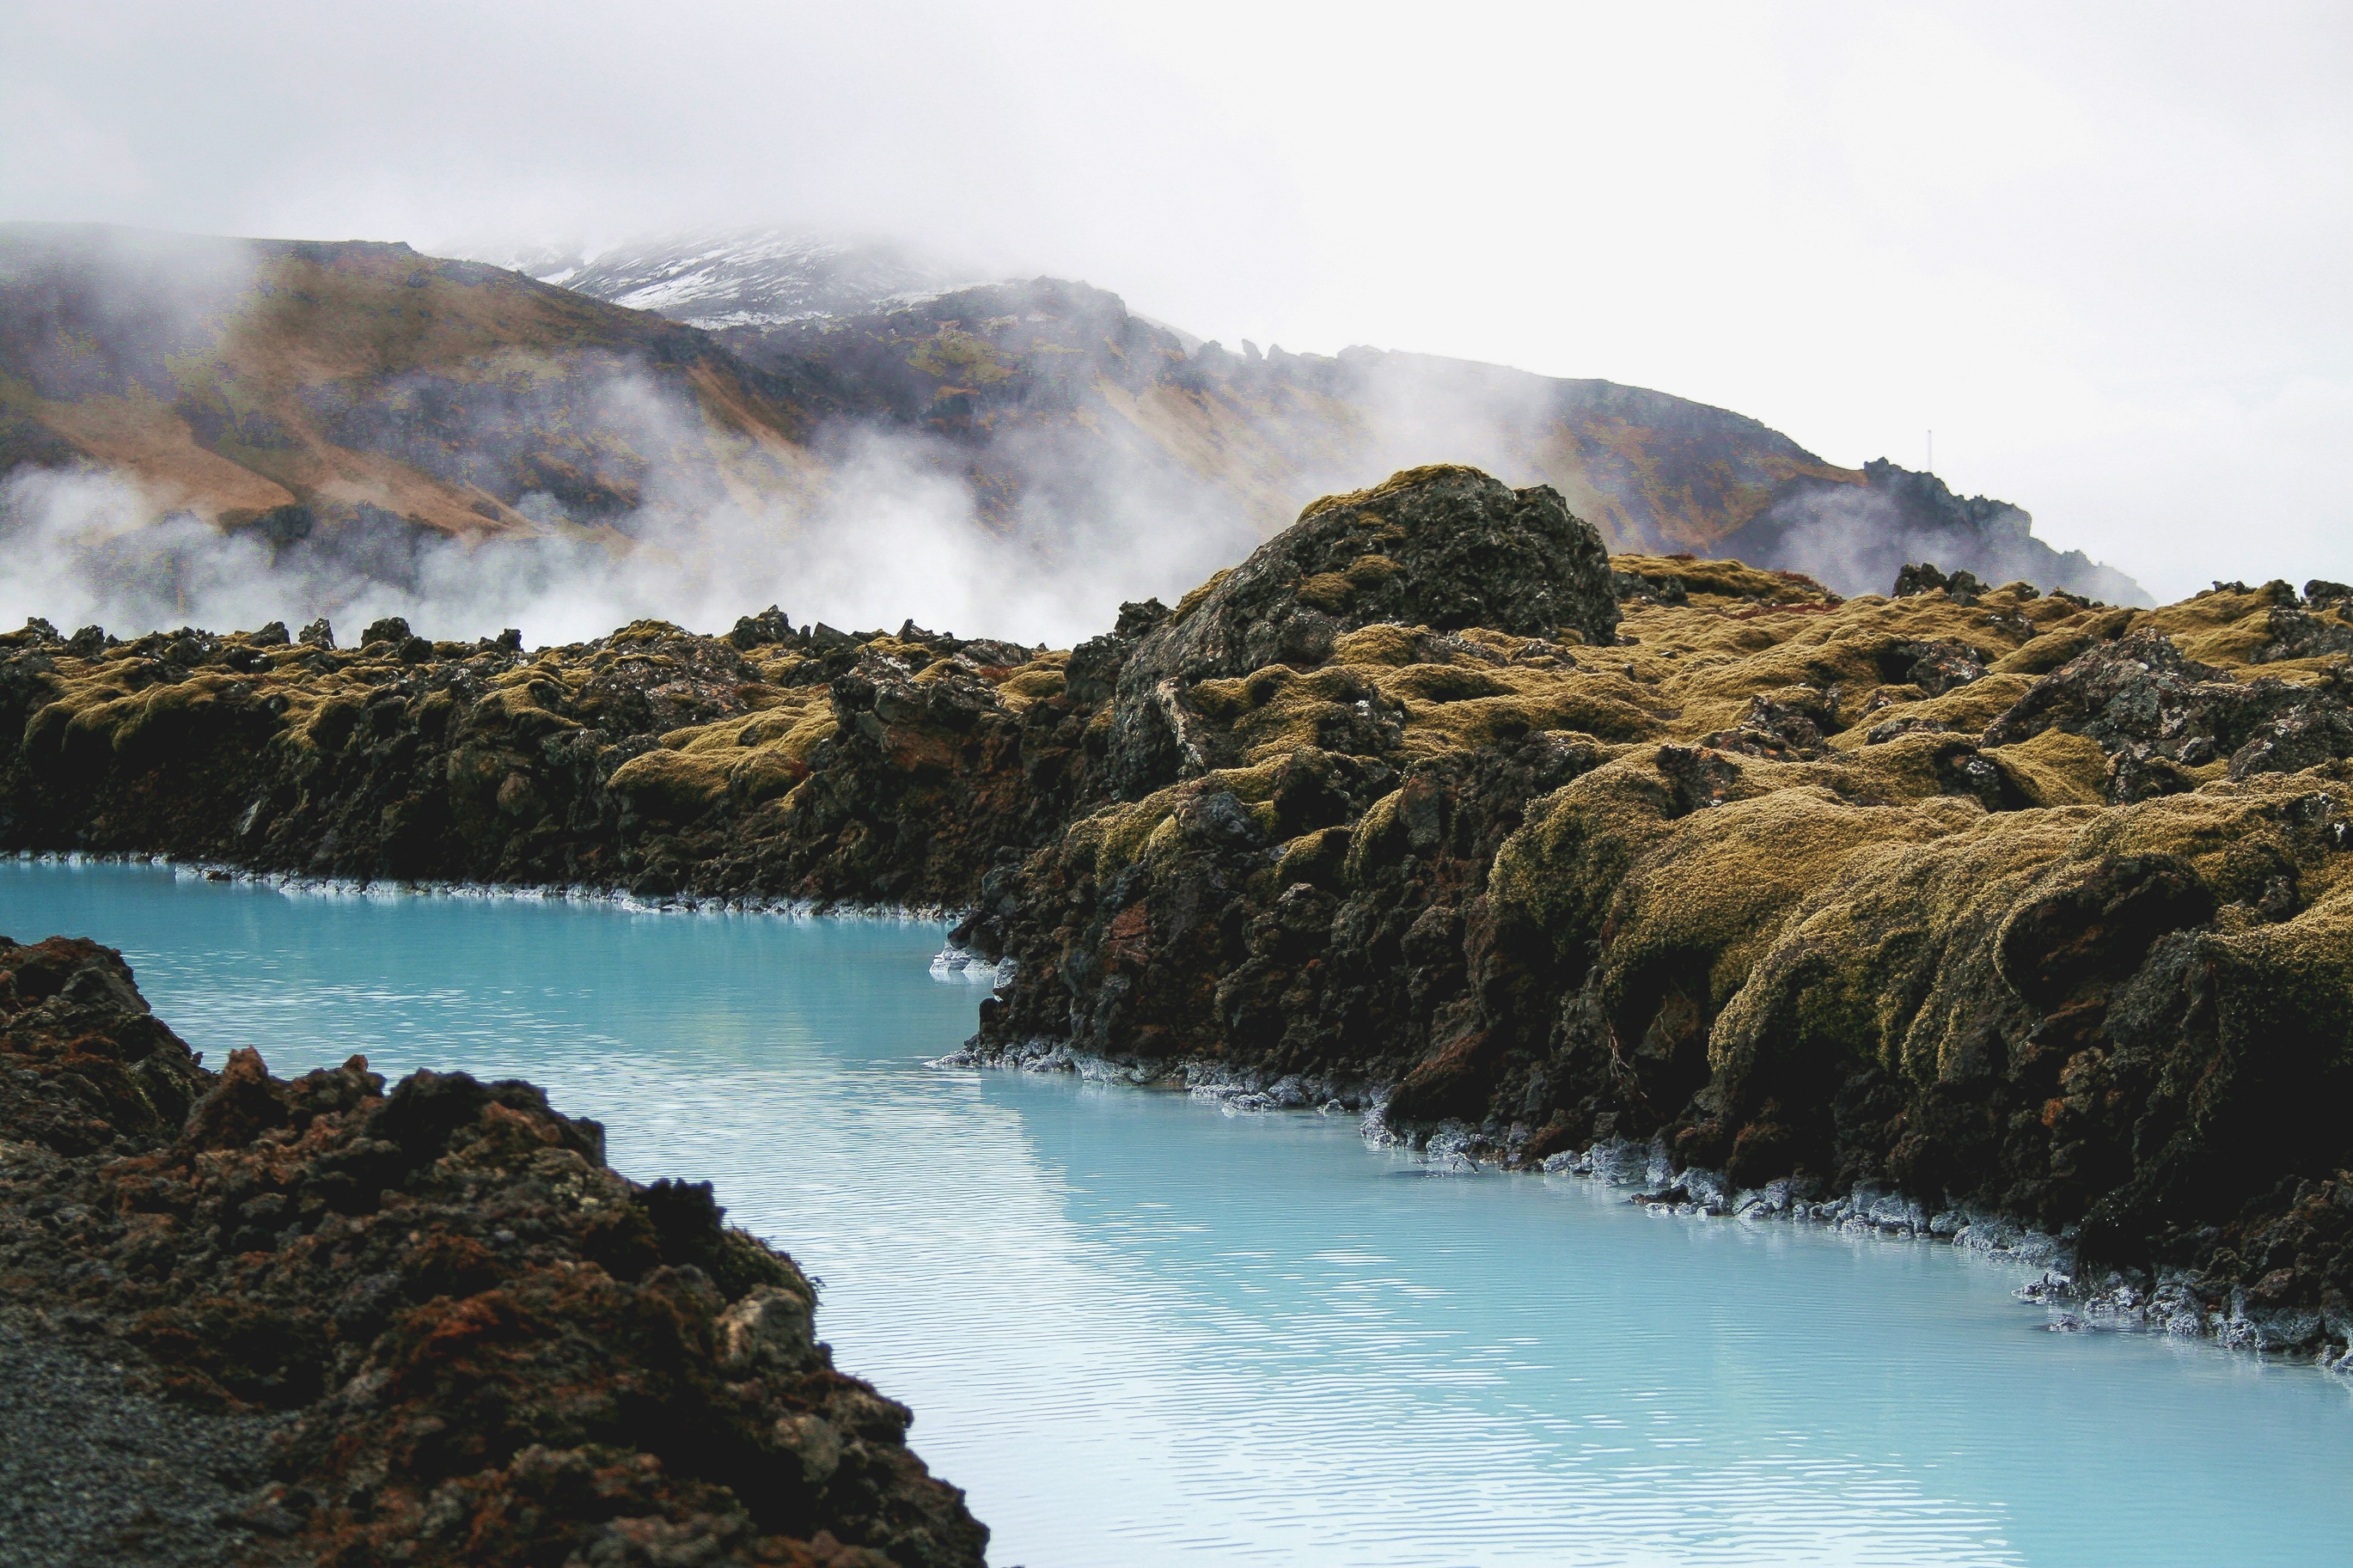 Running Geothermal Water, Canal, Channel, Geothermal, Iceland, HQ Photo